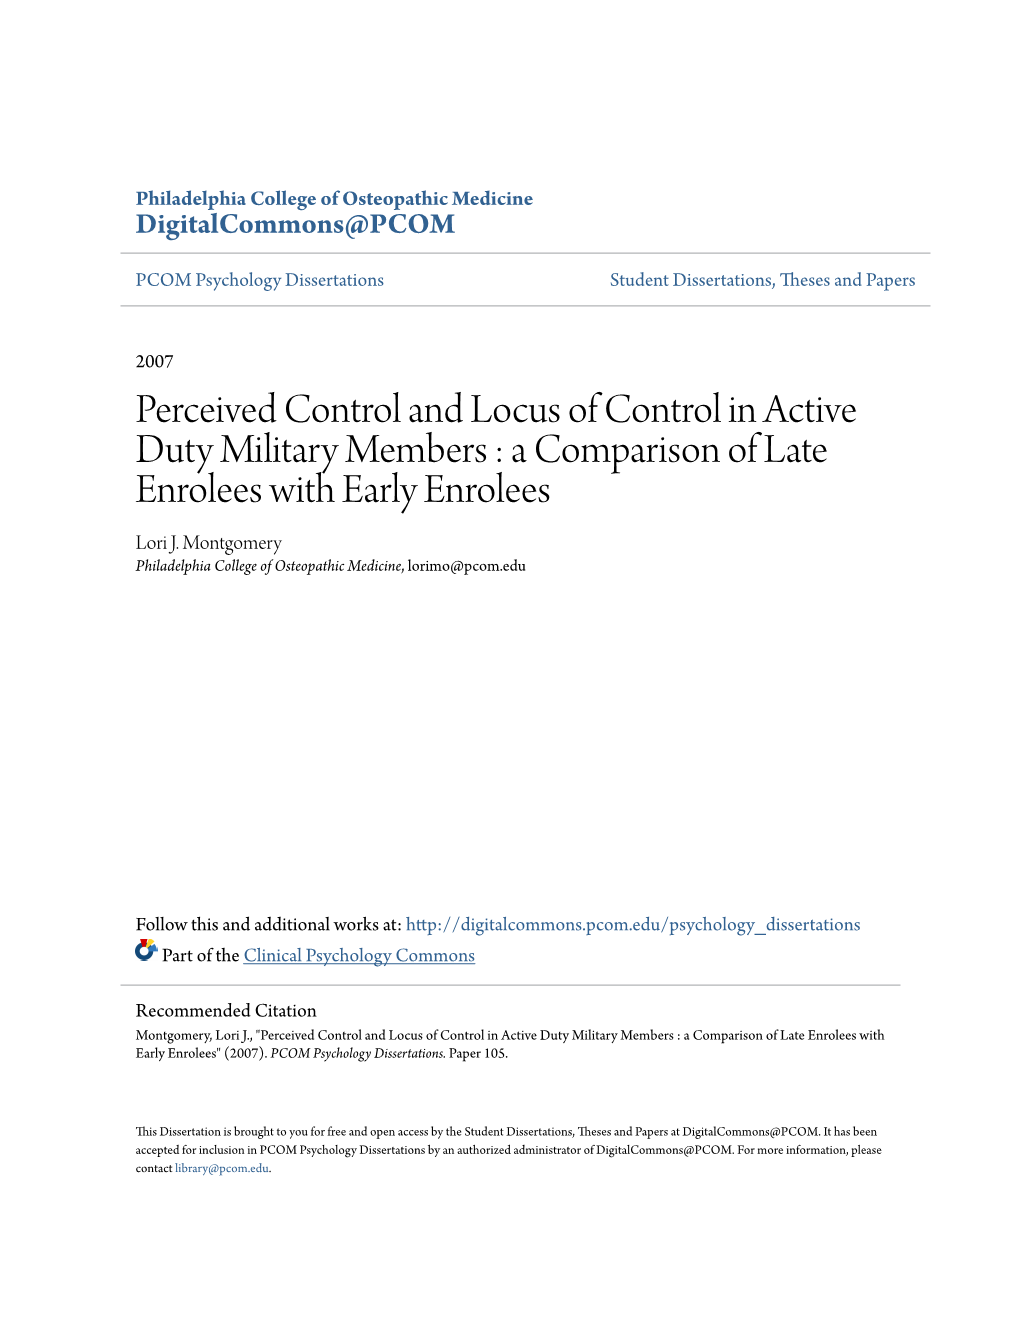 Perceived Control and Locus of Control in Active Duty Military Members : a Comparison of Late Enrolees with Early Enrolees Lori J